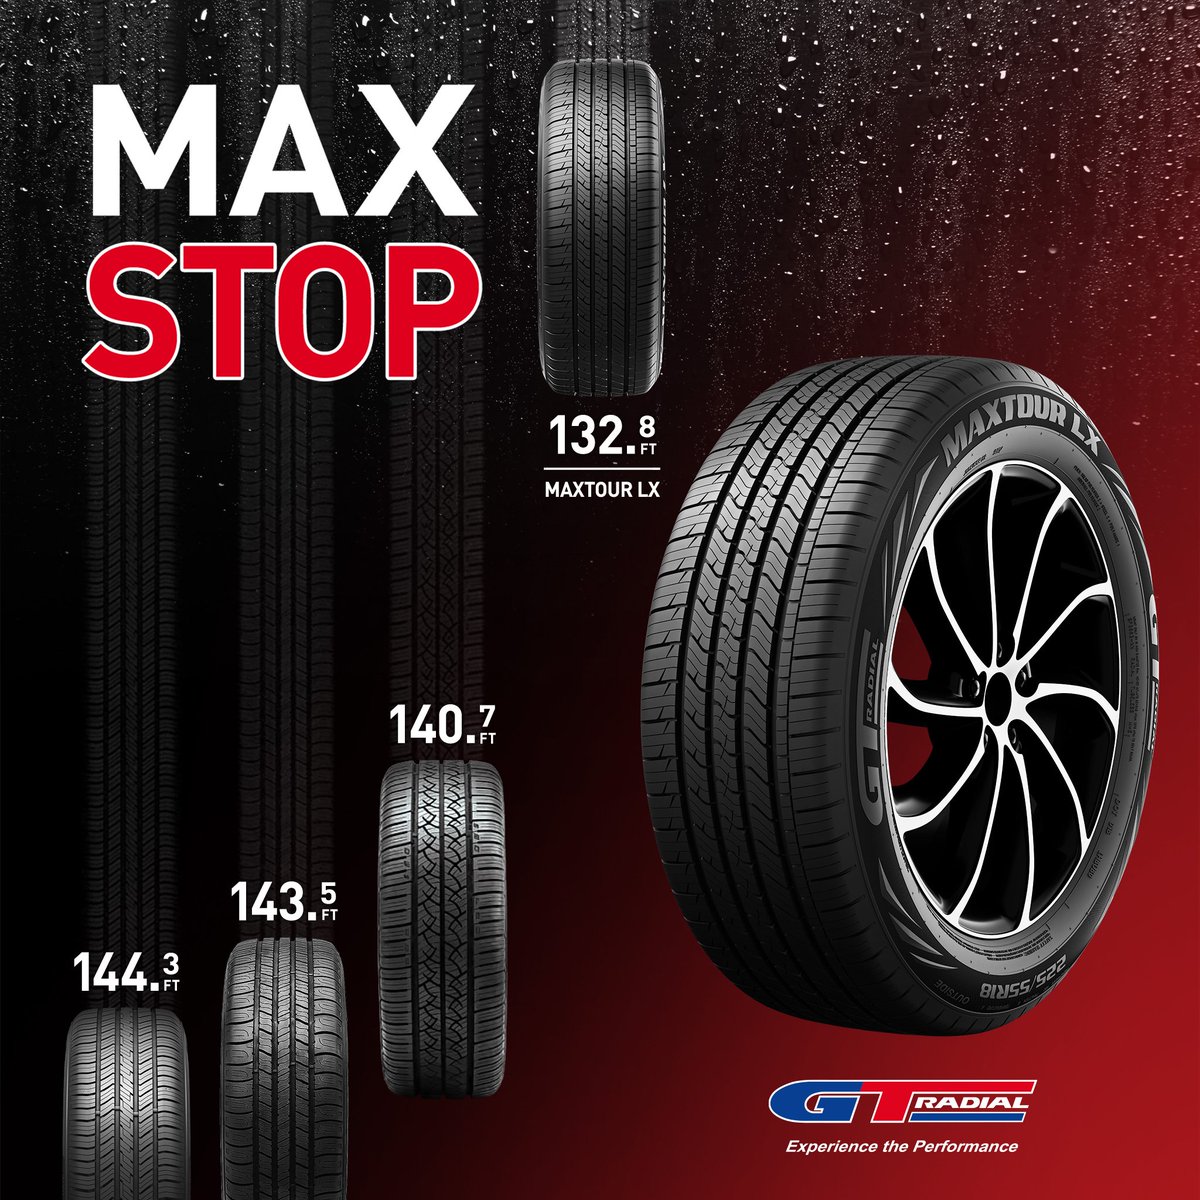 Introducing the all-new GT Radial Maxtour LX! When it comes to braking, every foot is worth a mile. In a recent 60-0 mph wet braking test, the new Maxtour LX stopped shorter than the competition. See how the Maxtour LX stacks up against the competition at MaxtourLX.com.